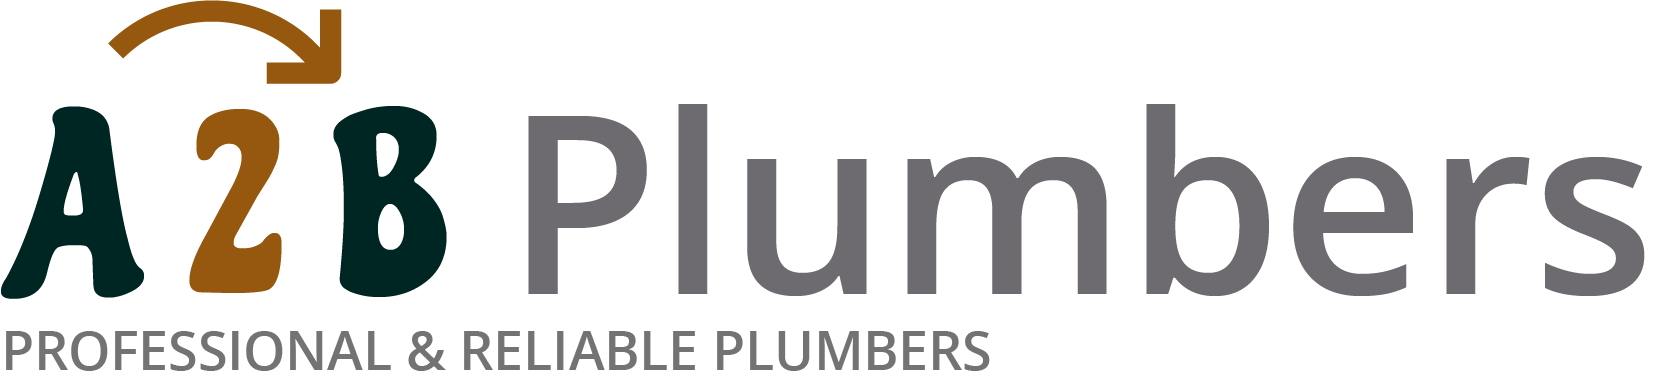 If you need a boiler installed, a radiator repaired or a leaking tap fixed, call us now - we provide services for properties in Bude and the local area.